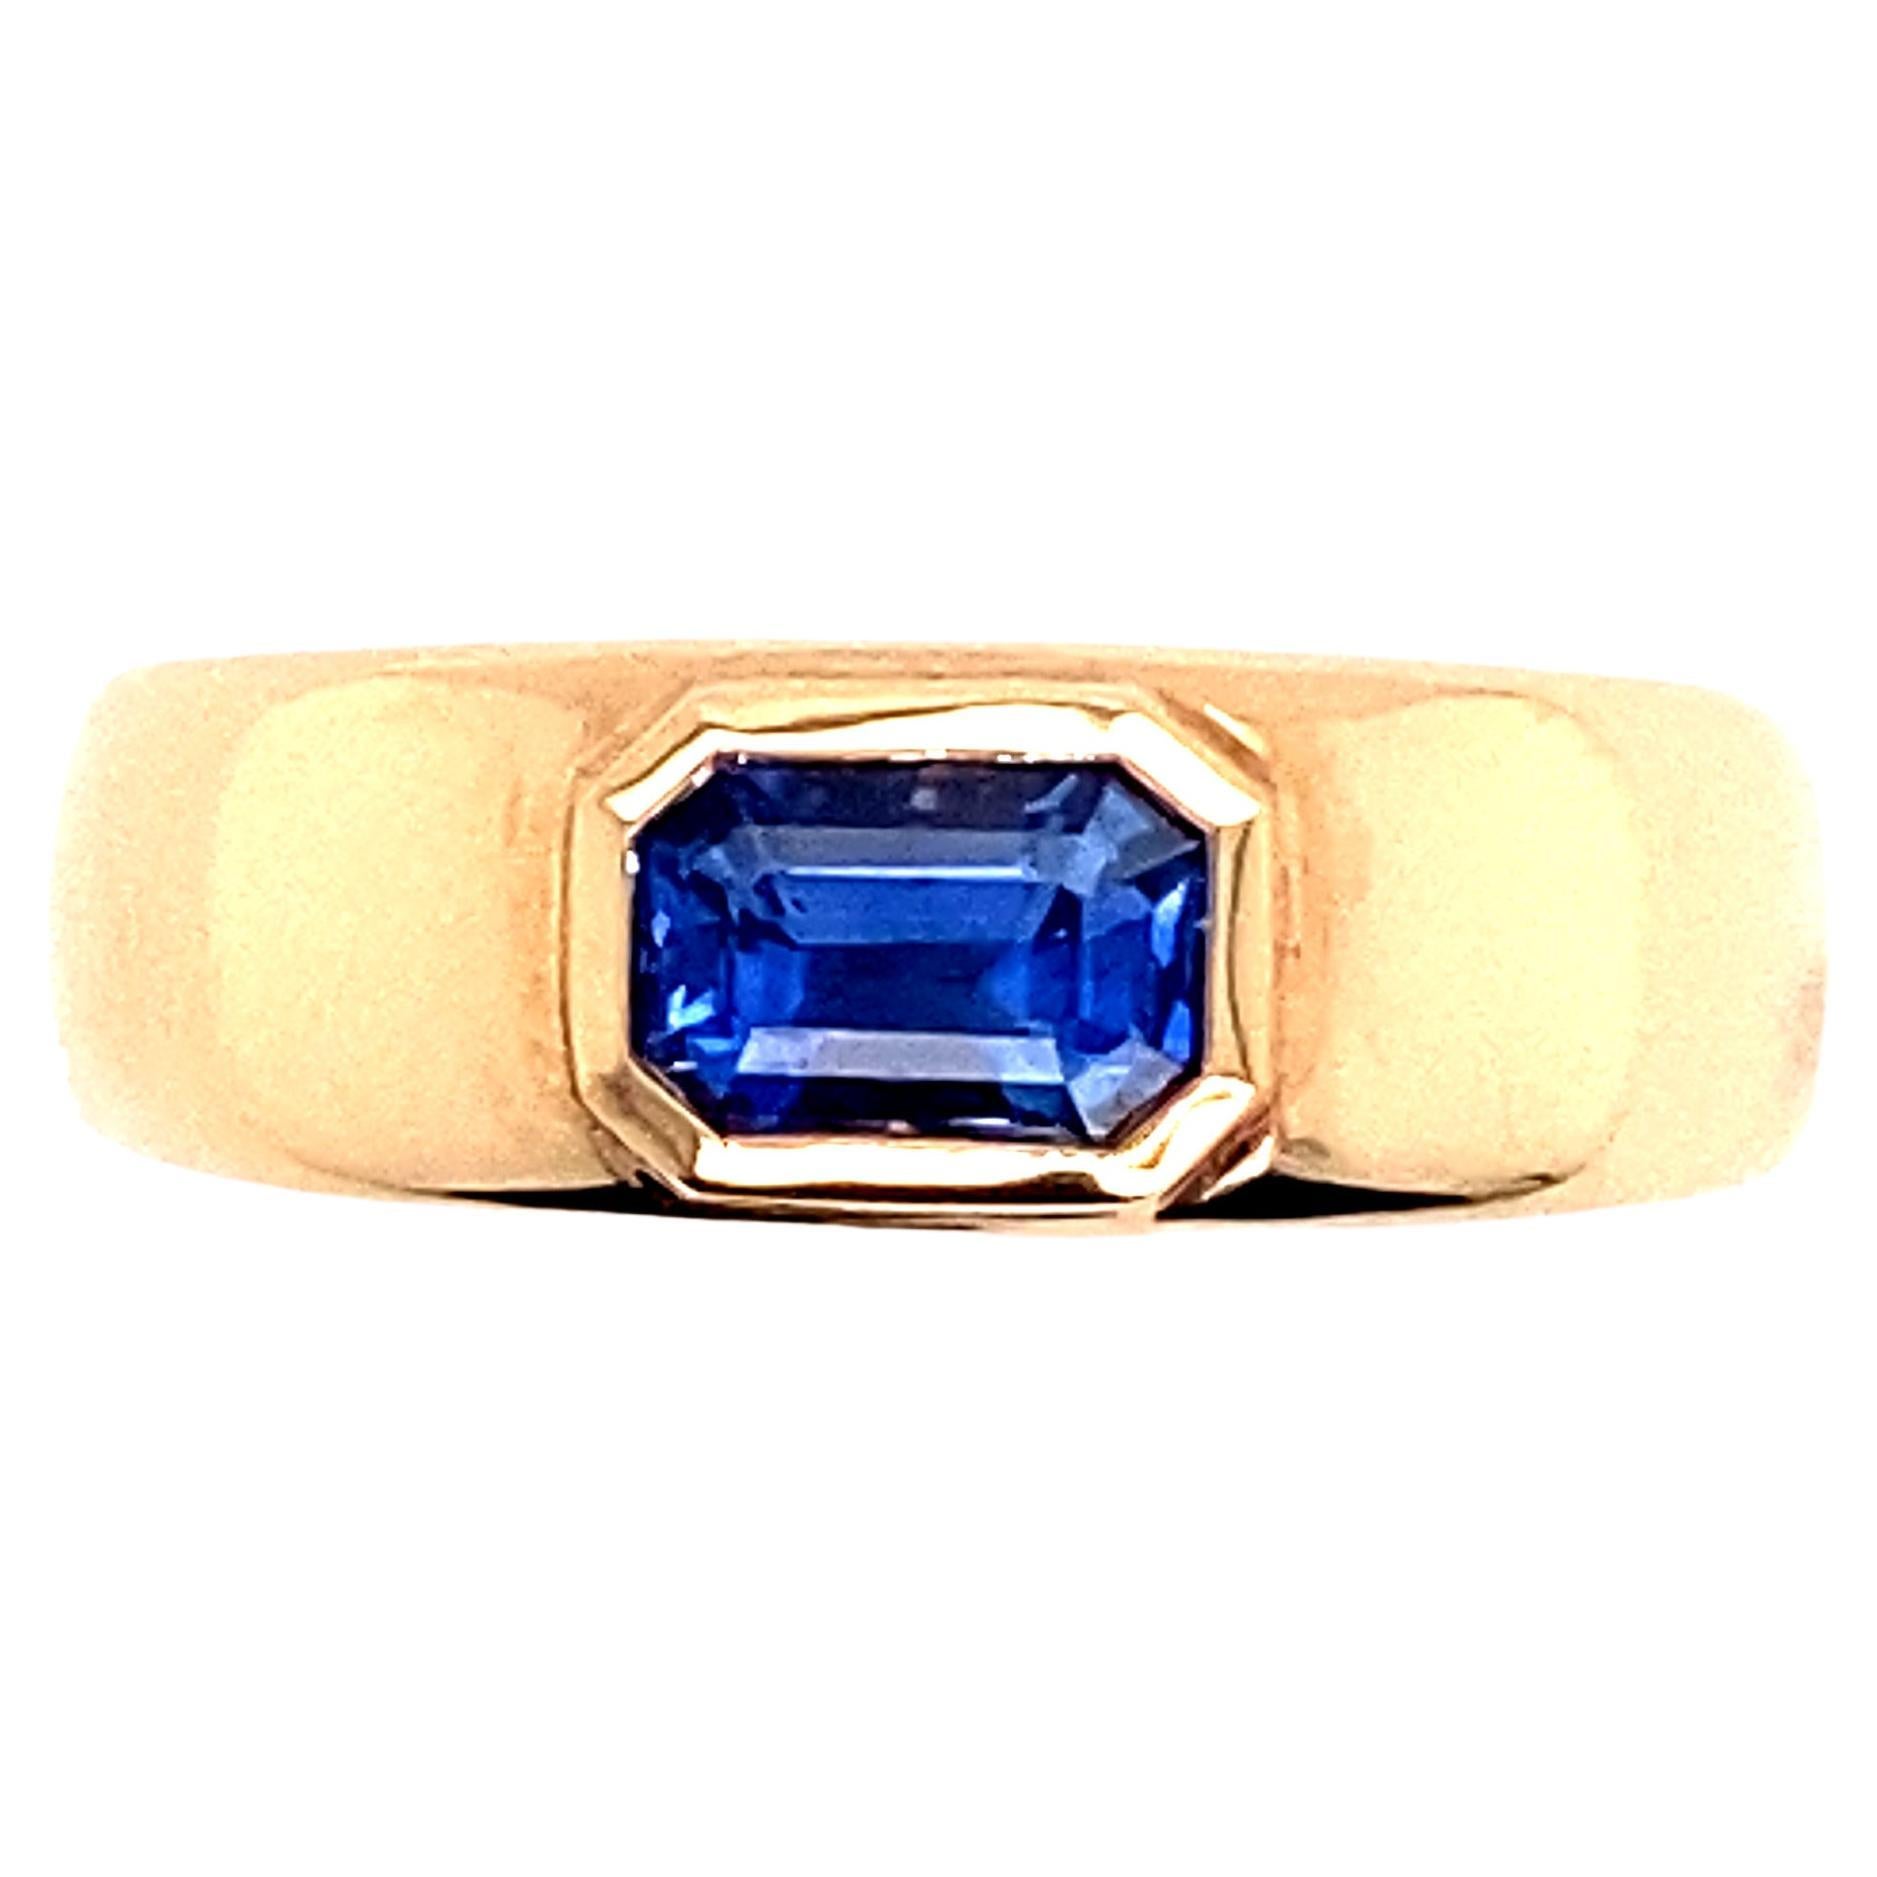 Ring with It's Blue Sapphire Emerald Cut or RPC Pink Gold 18 Karat 